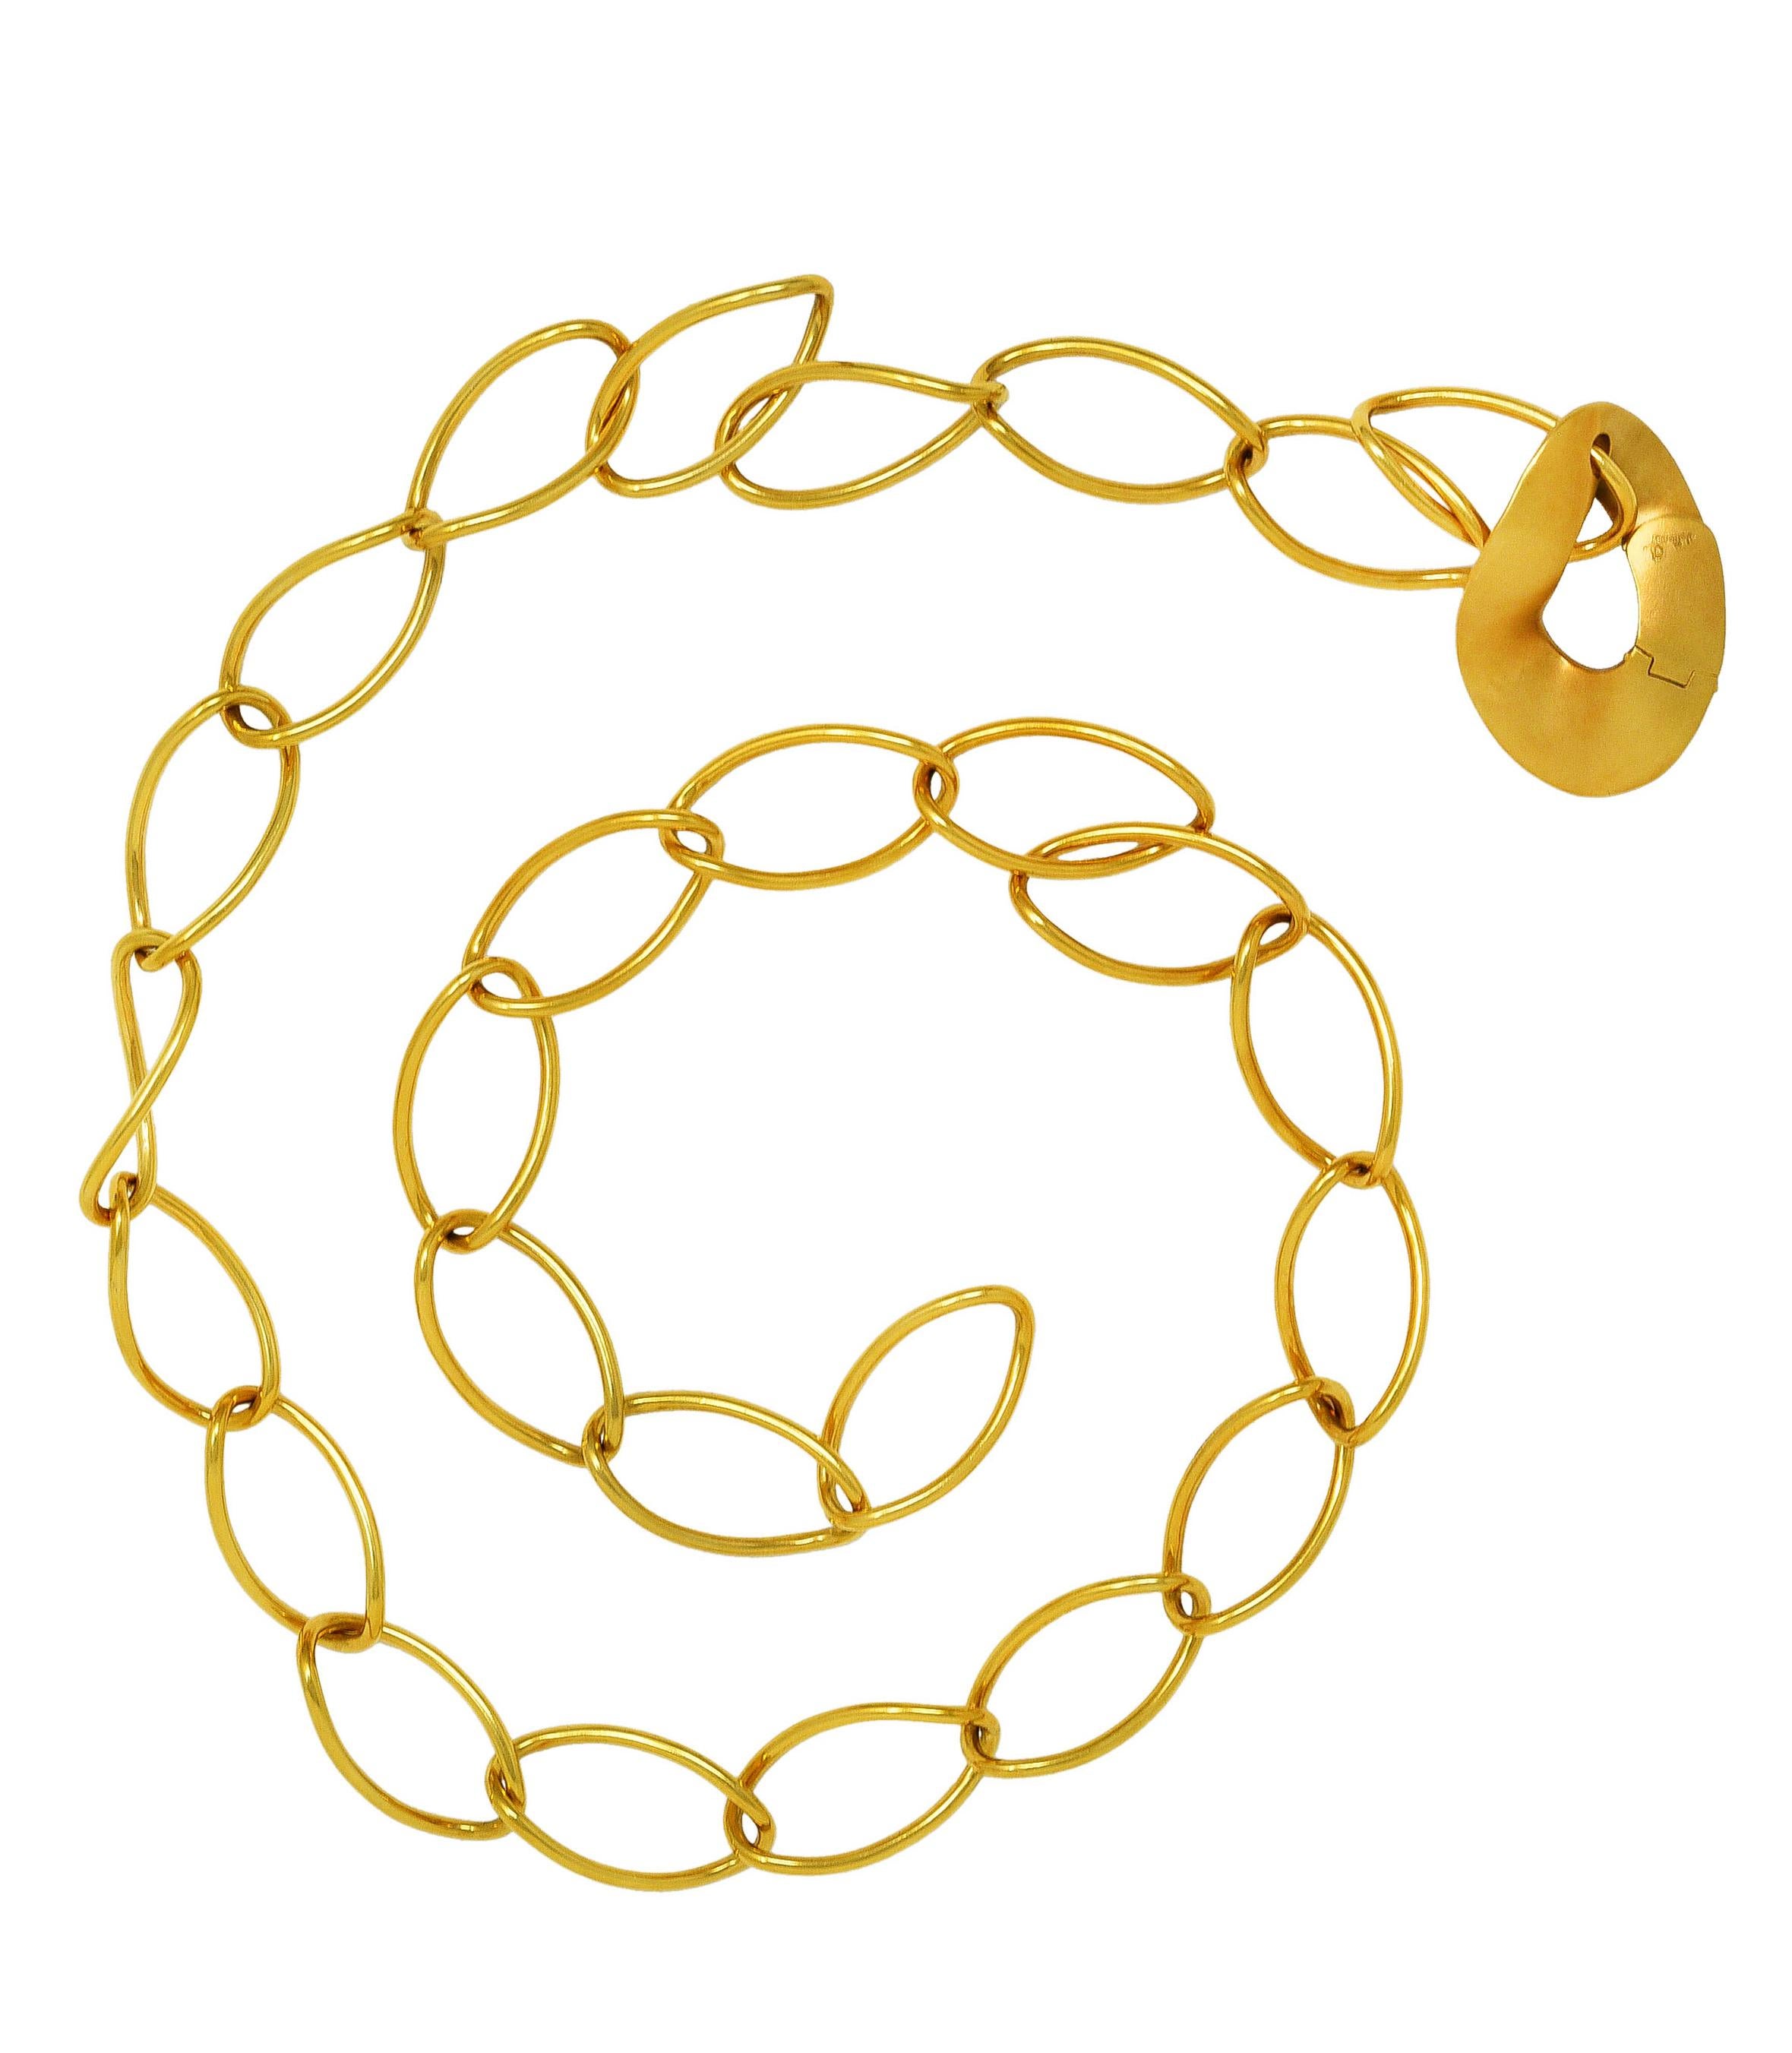 Necklace is designed as large twisted oval links. With single flat matte gold link. Completed by hidden hinged clasp. Stamped 750 for 18 karat gold. Numbered and fully signed for Pomellato. With Italian assay marks for Milan, Italy. Circa: 21st